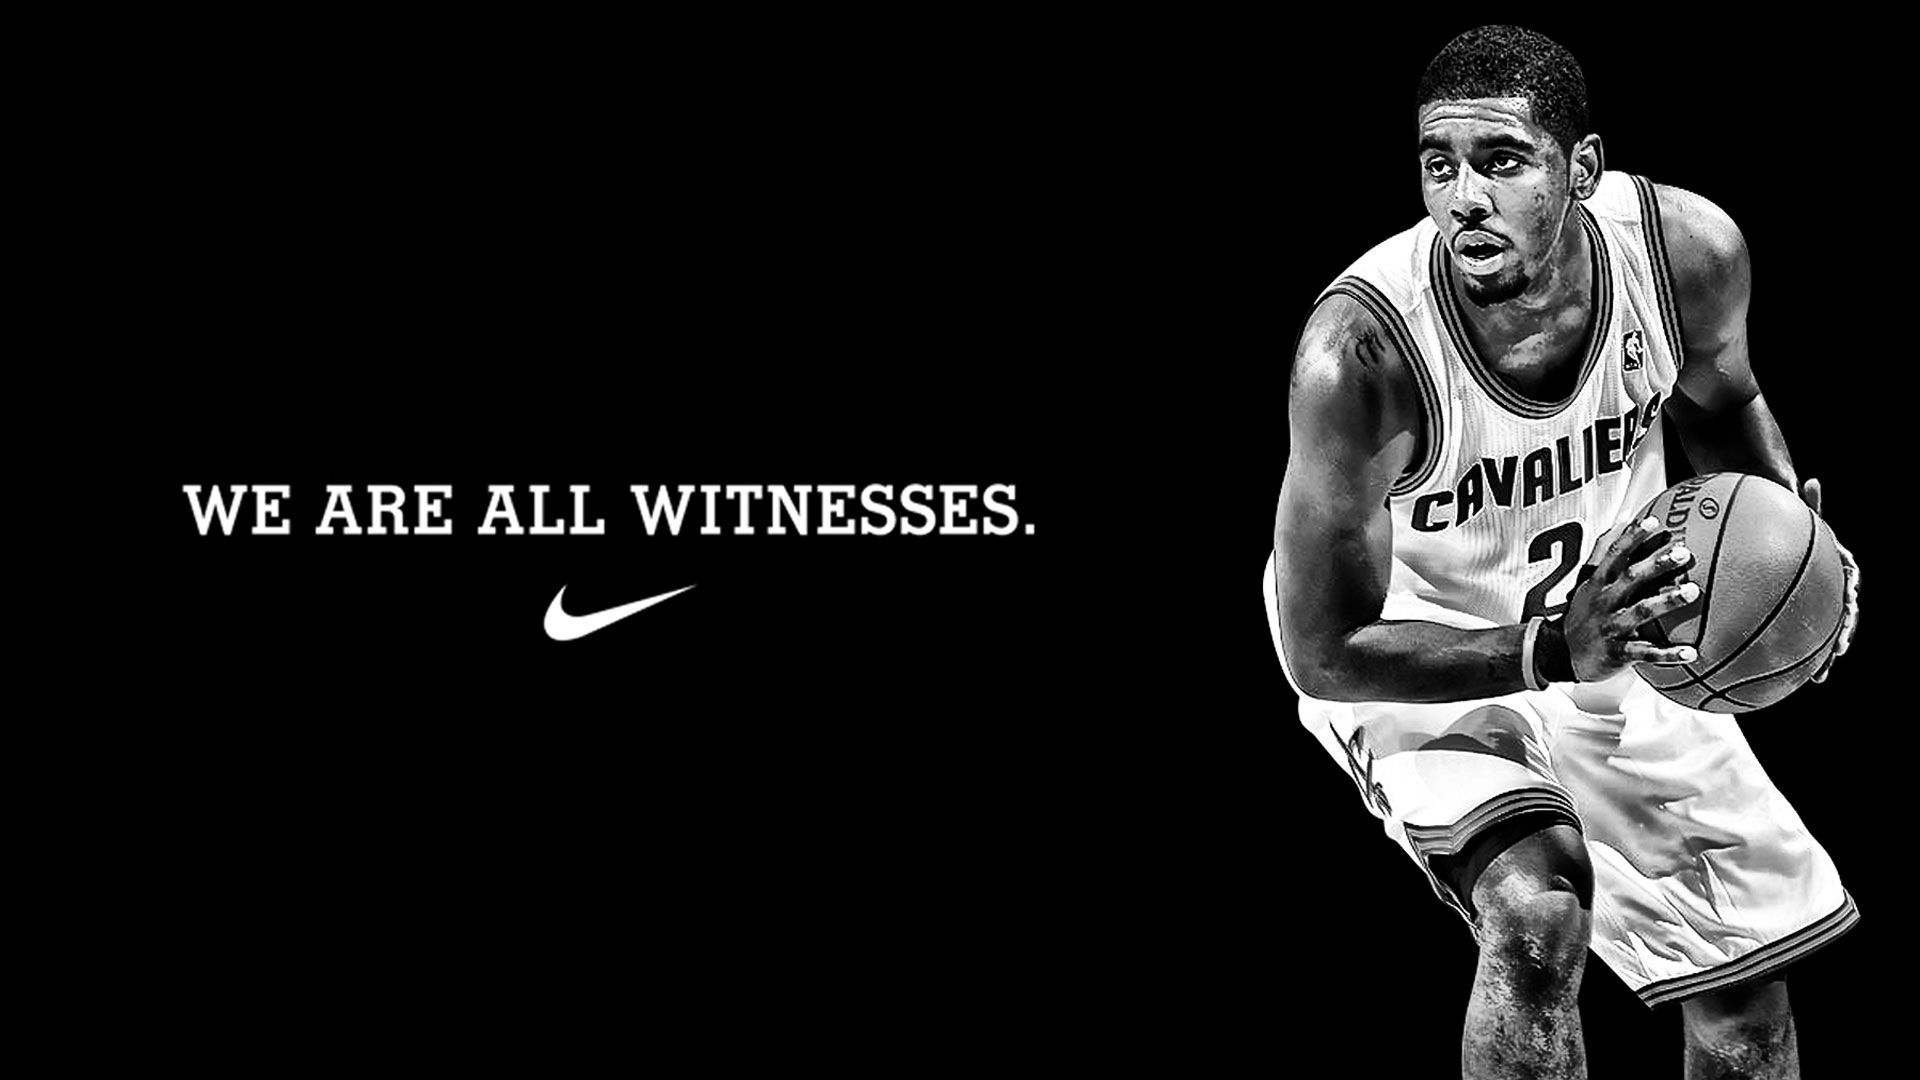 Kyrie Irving Wallpapers at BasketWallpaperscom Kyrie irving